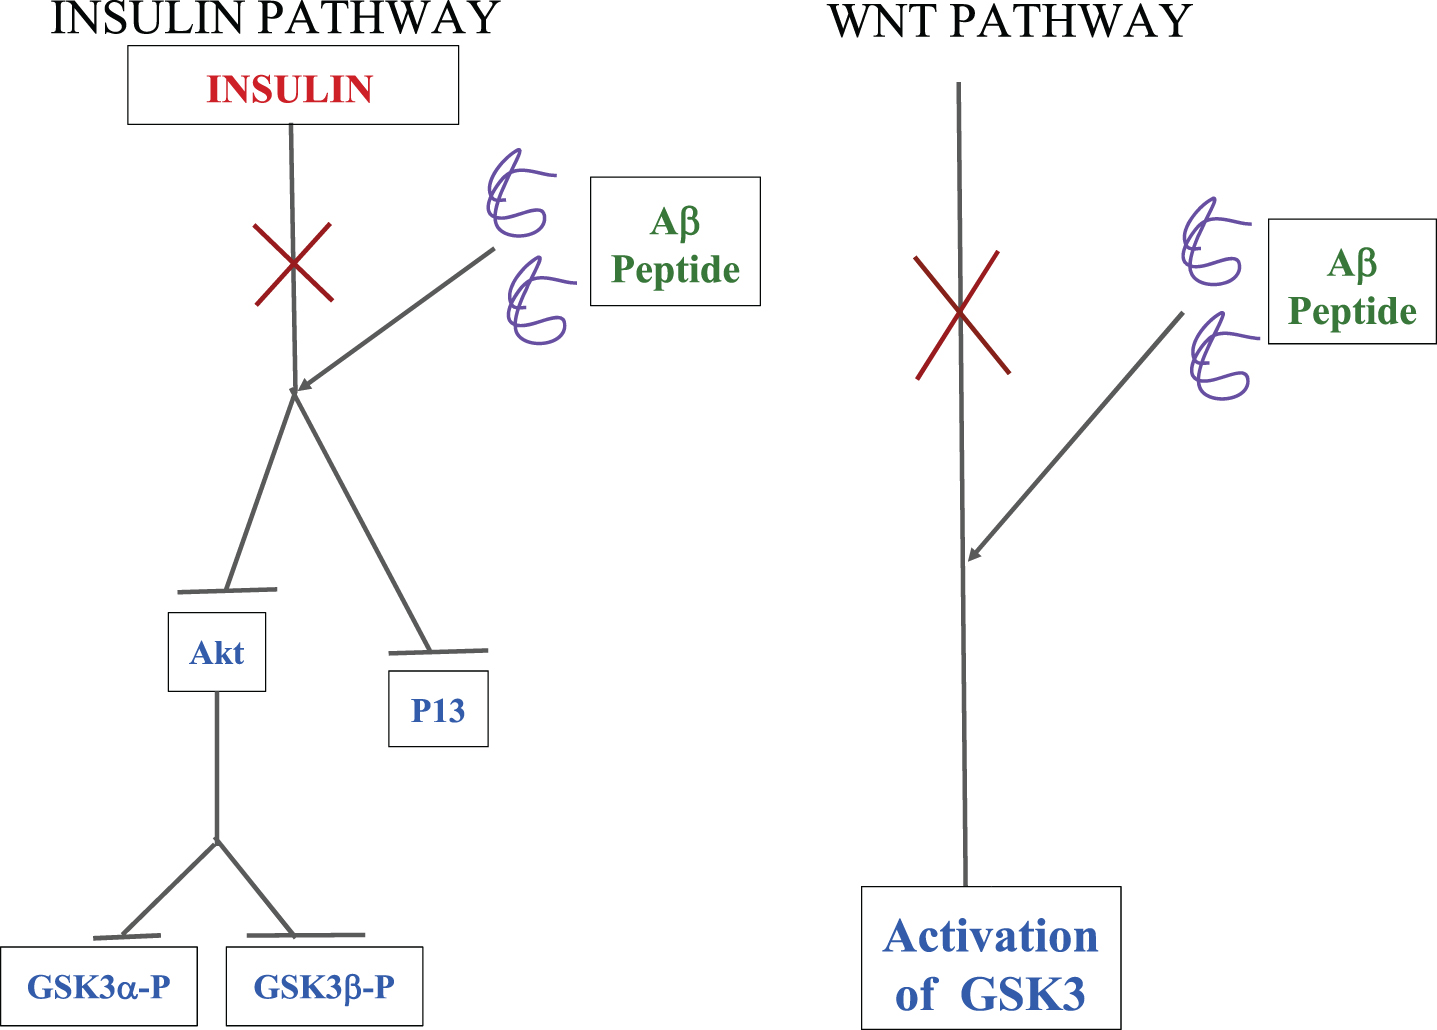 A schematic representation of how Aβ oligomers interfere with the insulin and Wnt pathways, leading to an increase in the levels of activated GSK3 in the cell which ultimately leads to neuron degeneration [30].